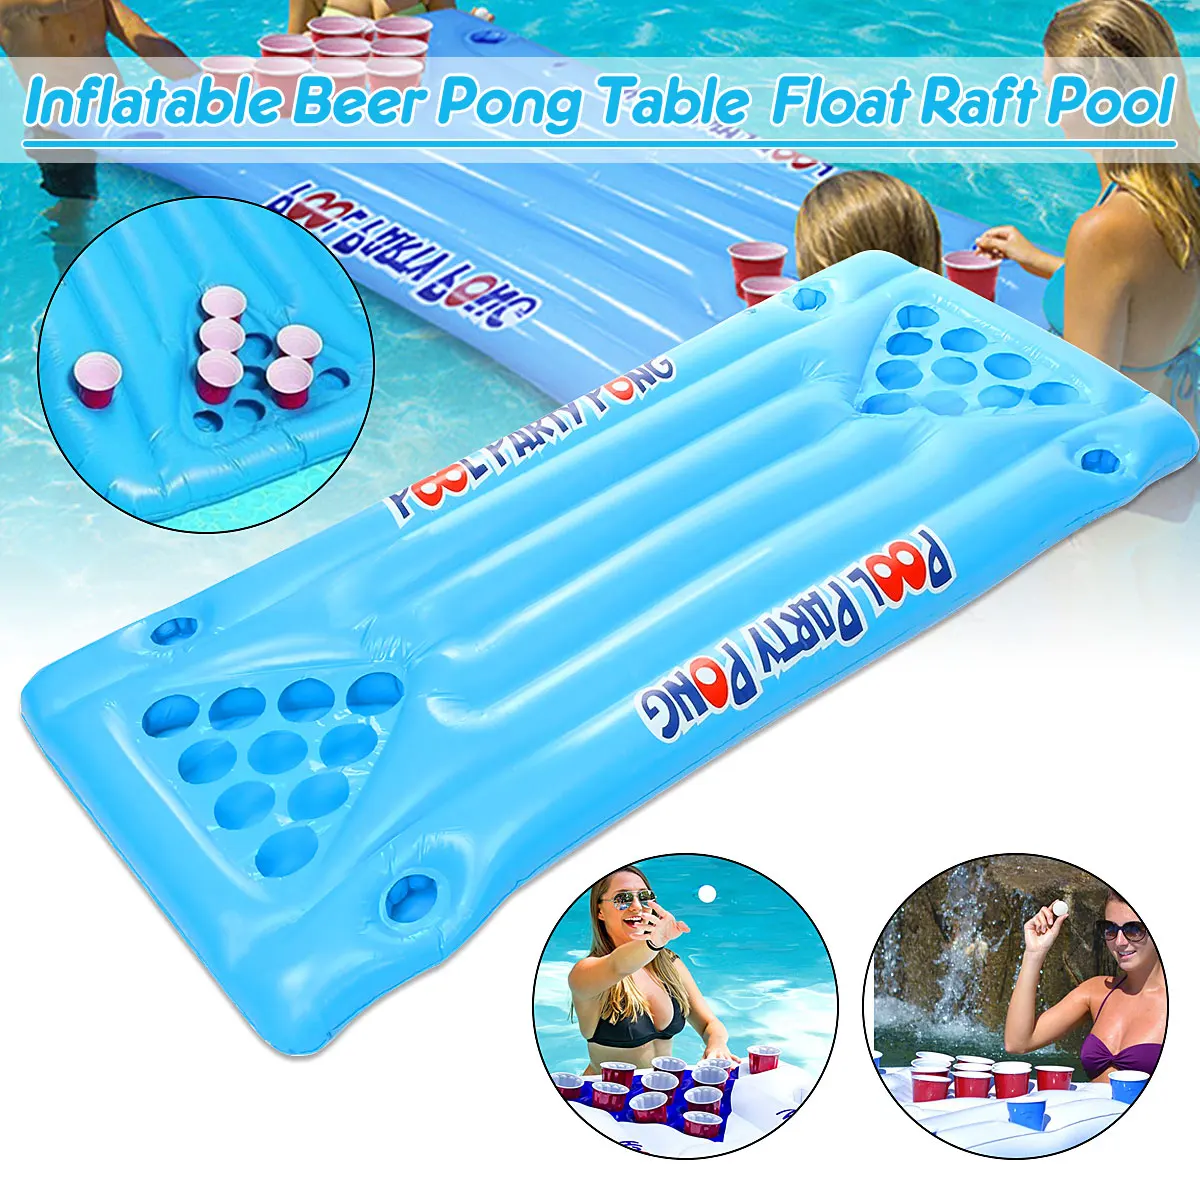 Inflatable Beer Pool Pong Float Table Raft Lounge Party Game 24 Cup Holder1lo 